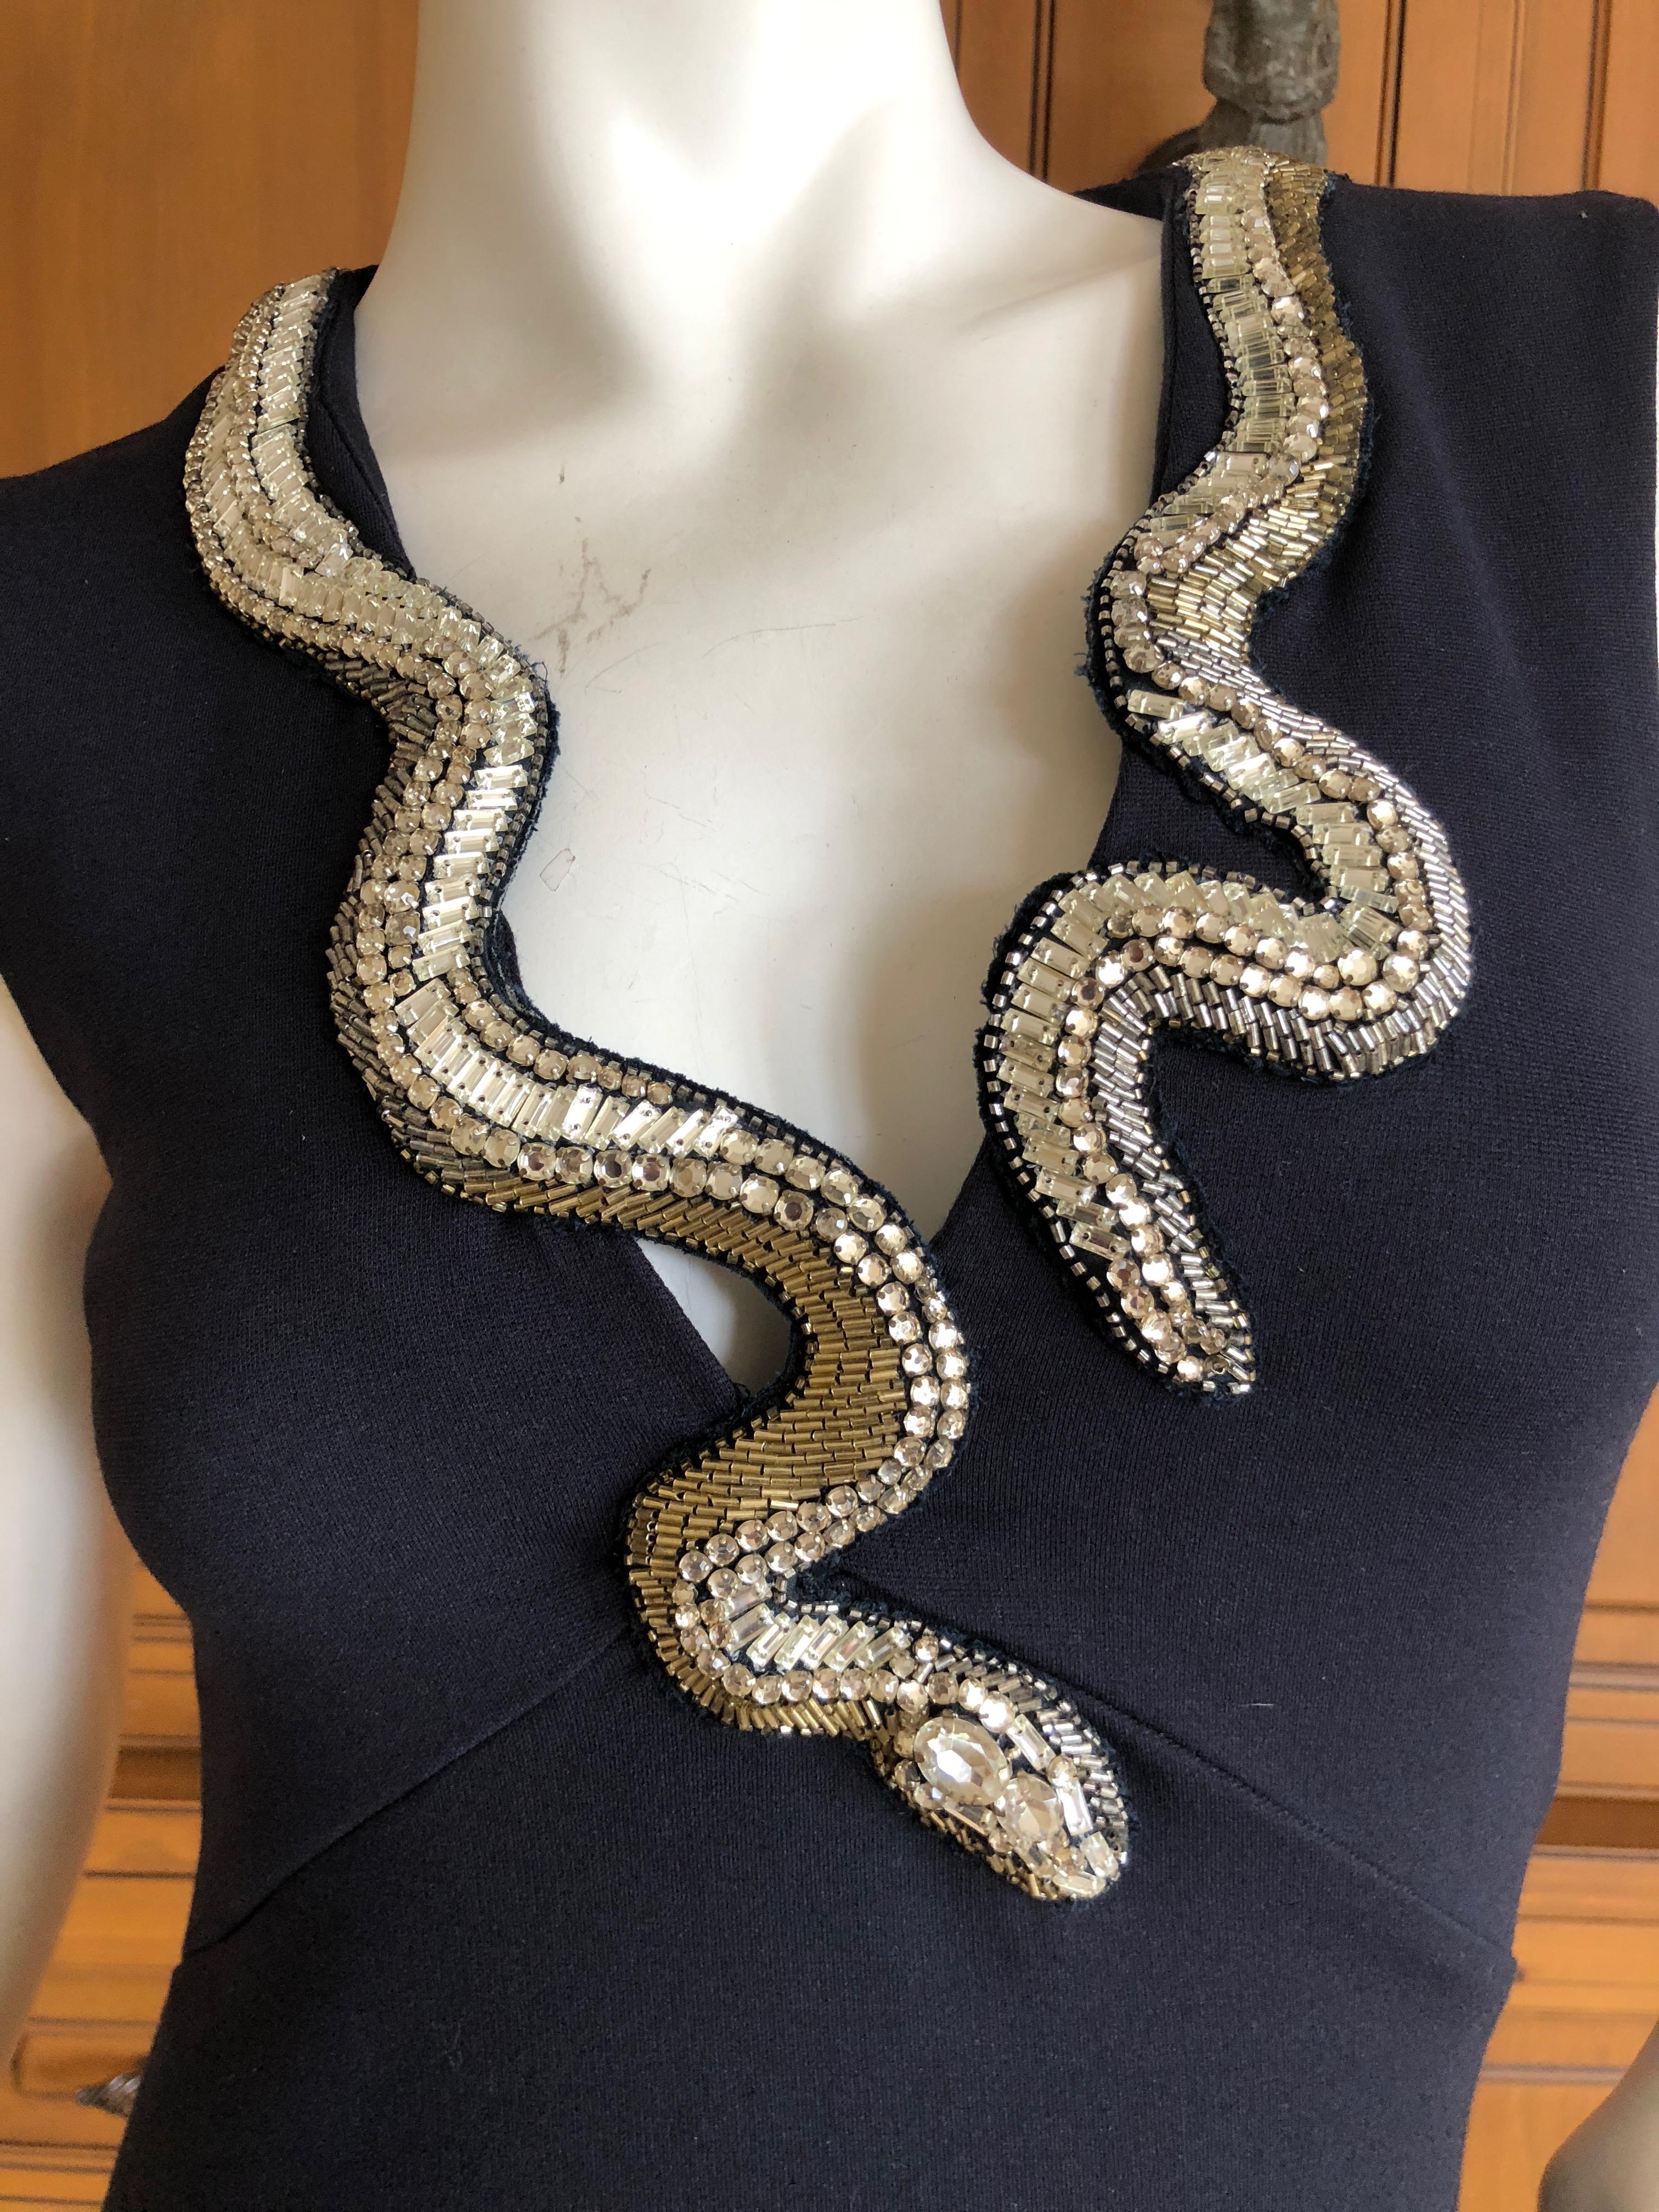 Roberto Cavalli Vintage Black Bodycon Dress with Embellished Snake Collar.
Who created the first snake embellished fashion? Ask Eve.
This is amazing, very stretchy dress, hugs all the right places.
 Size 46
 Bust 38